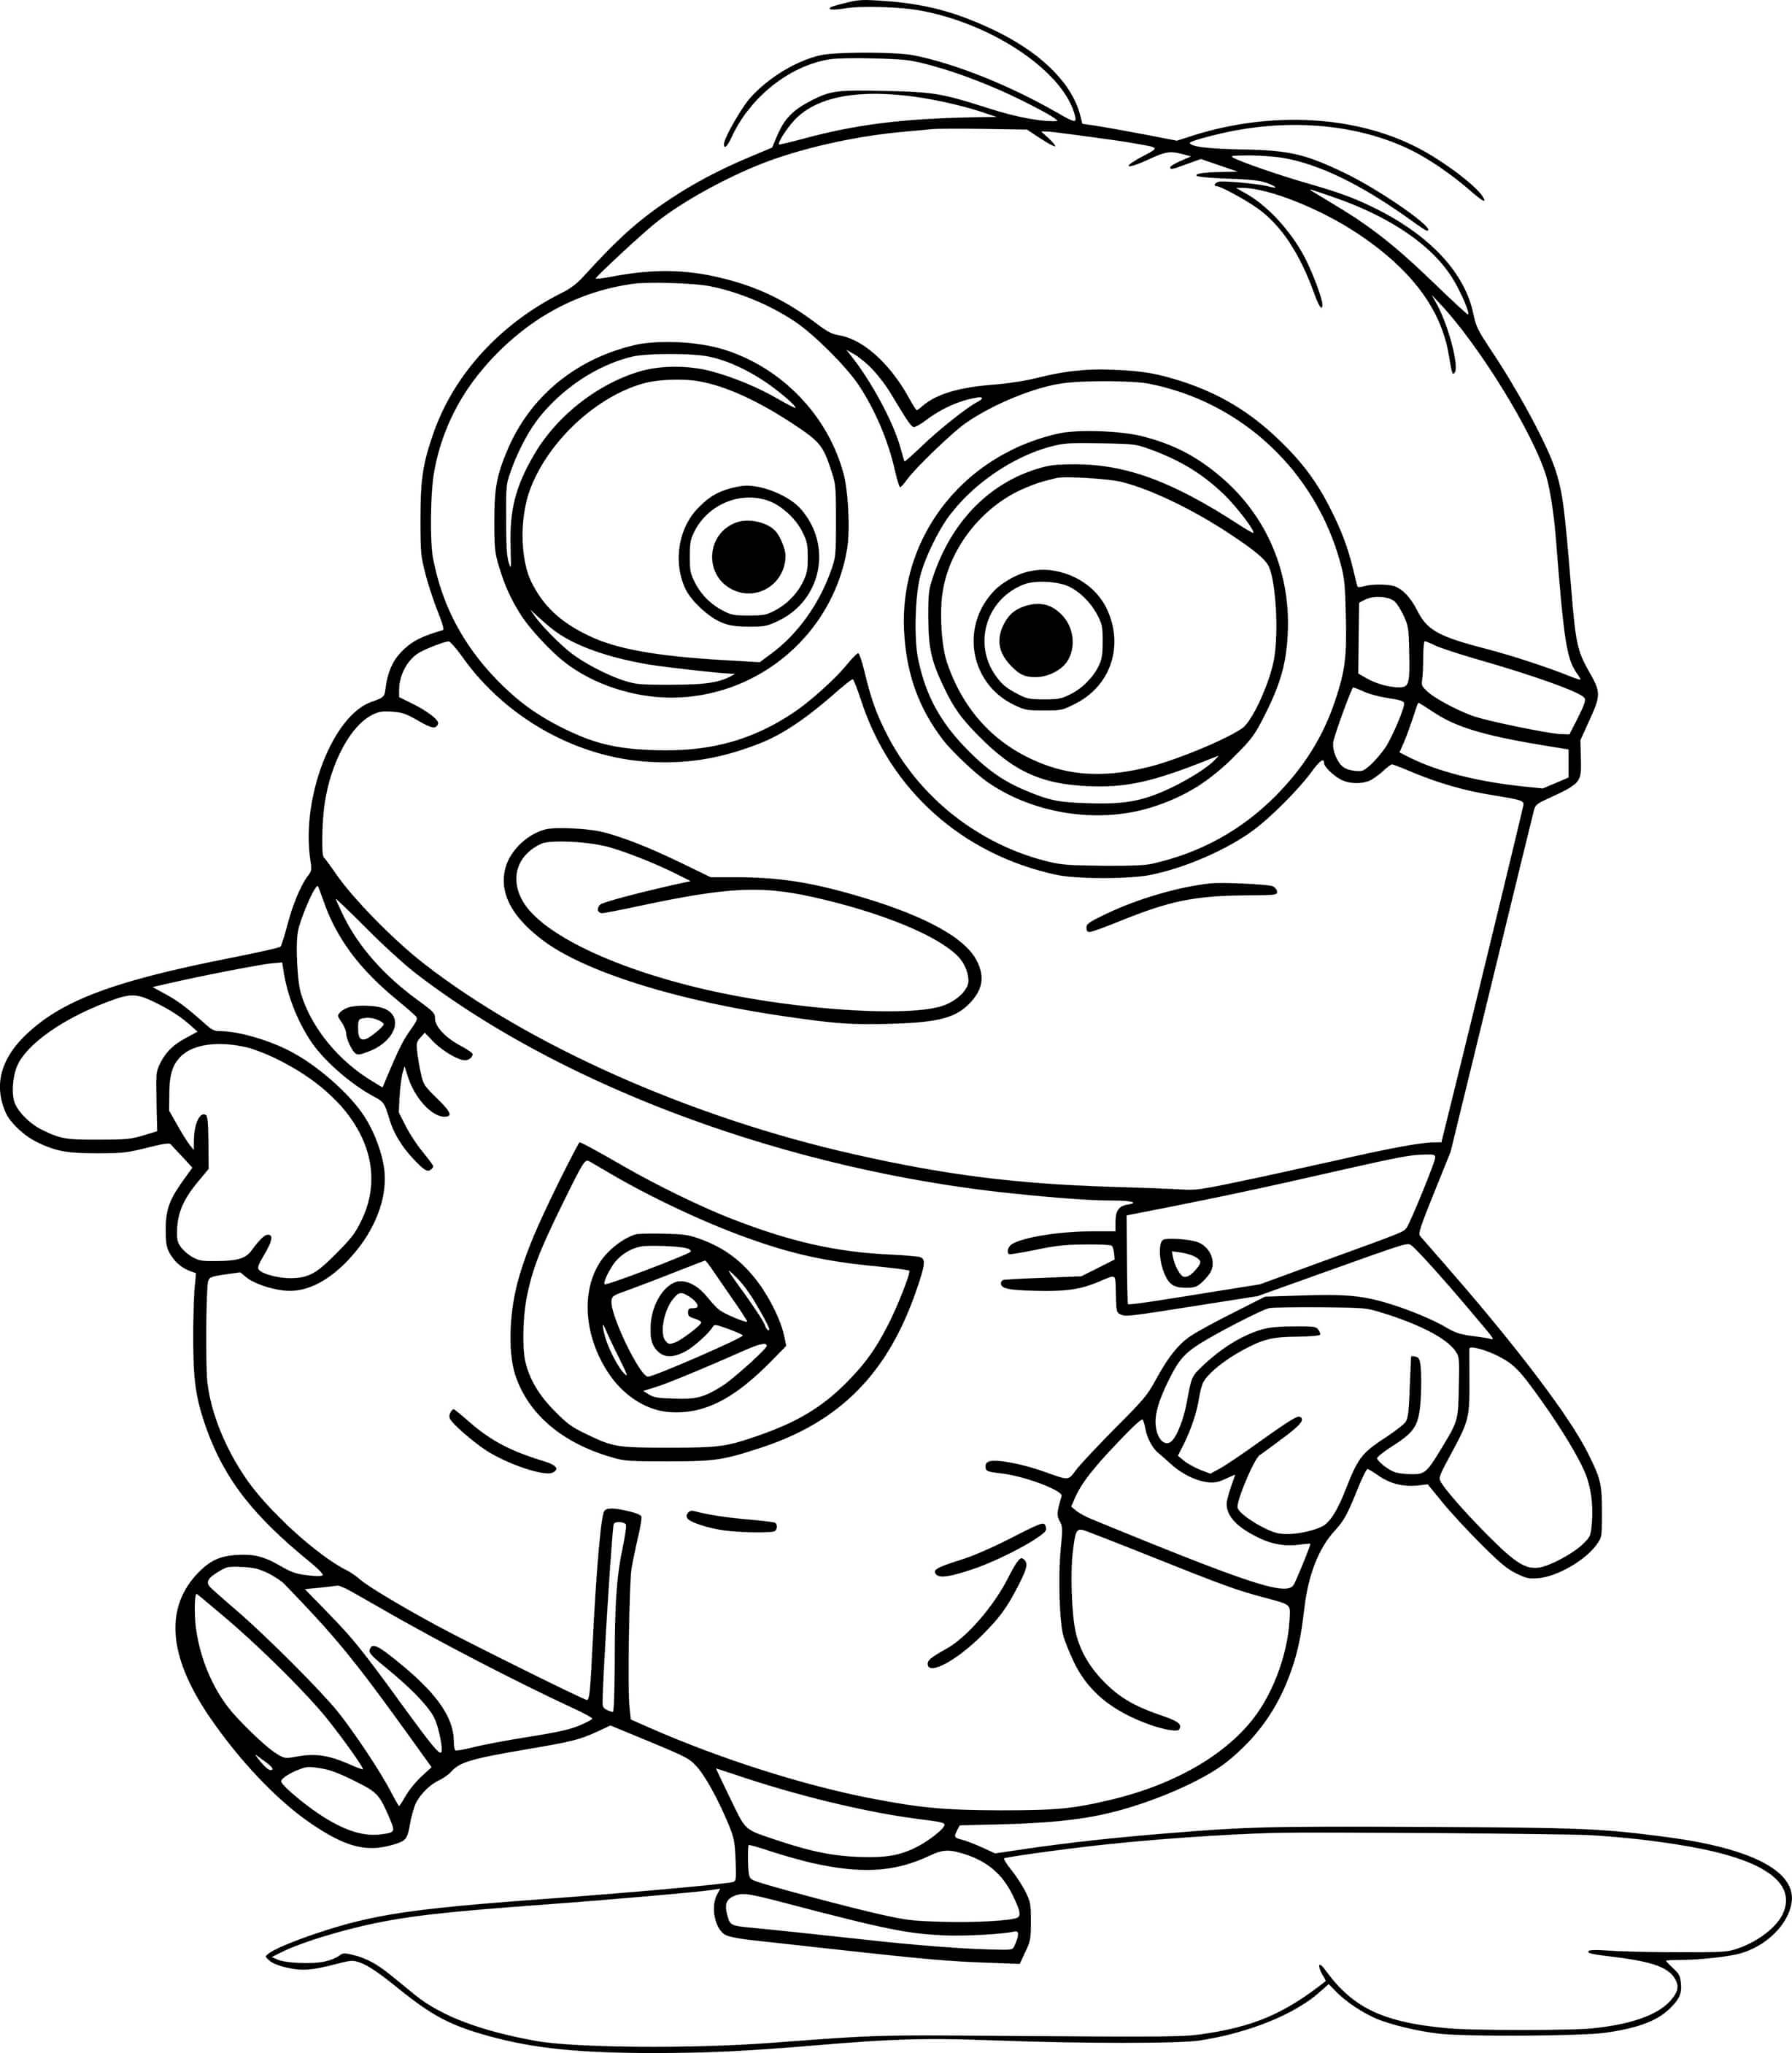 Minion In The Puddle Coloring Page